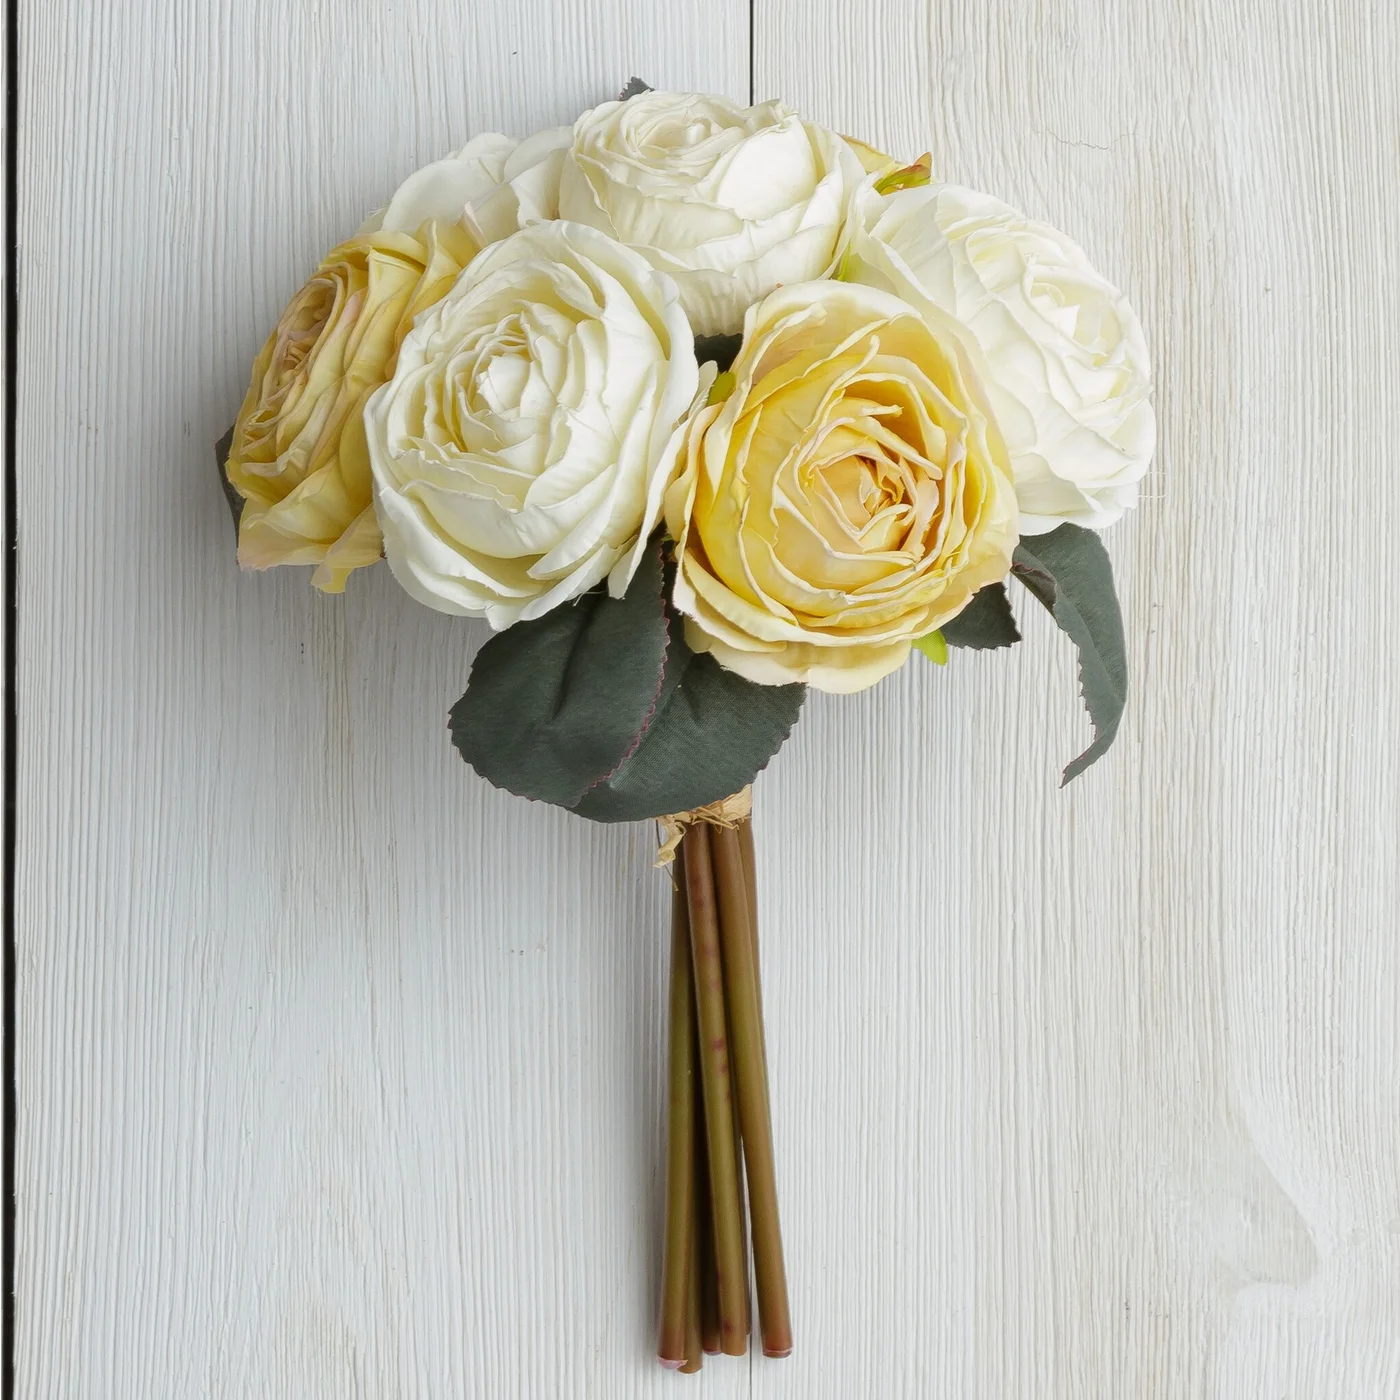 Cream and White Roses 9.5" H Faux Floral Bunch